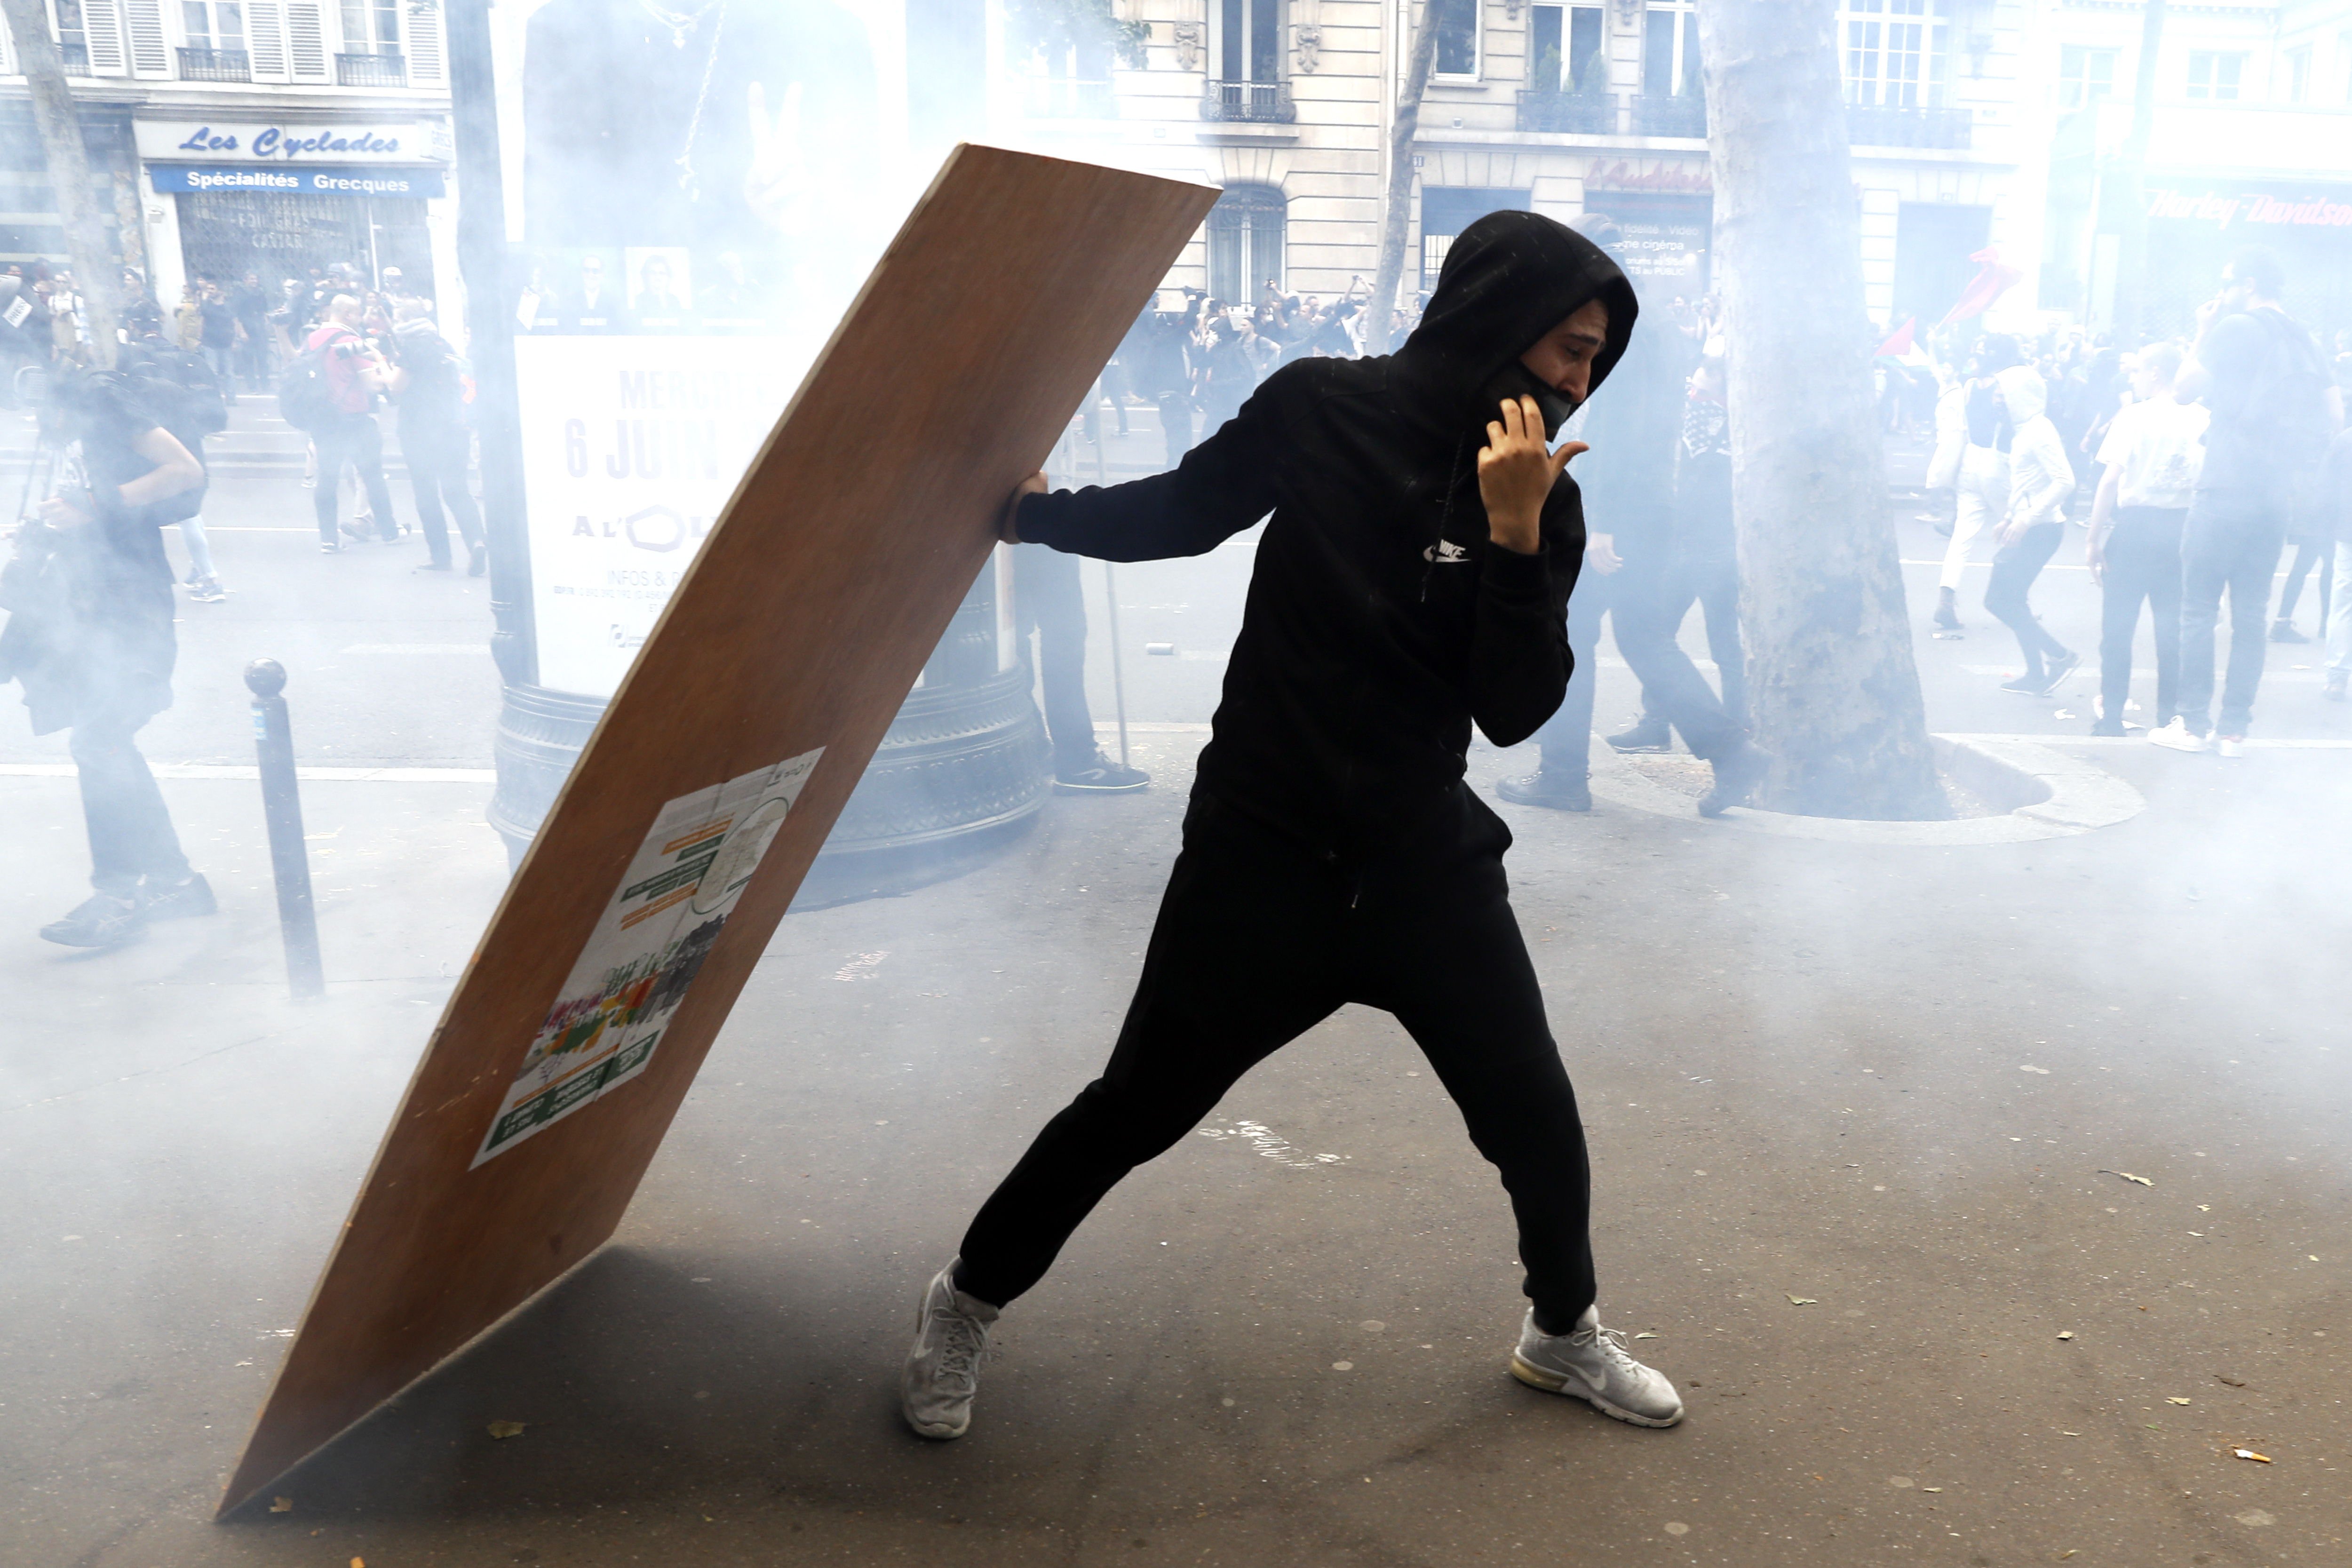 Paris (France), 26/05/2018.- A protester takes cover behind a wooden plank as clashes erupt with the police during a demonstration against French government reforms in Paris, France, 26 May 2018. Far left political parties and French trade union CGT (General Confederation of Labour) call for a national day of protest against the government policies. (Protestas, Francia) EFE/EPA/ETIENNE LAURENT